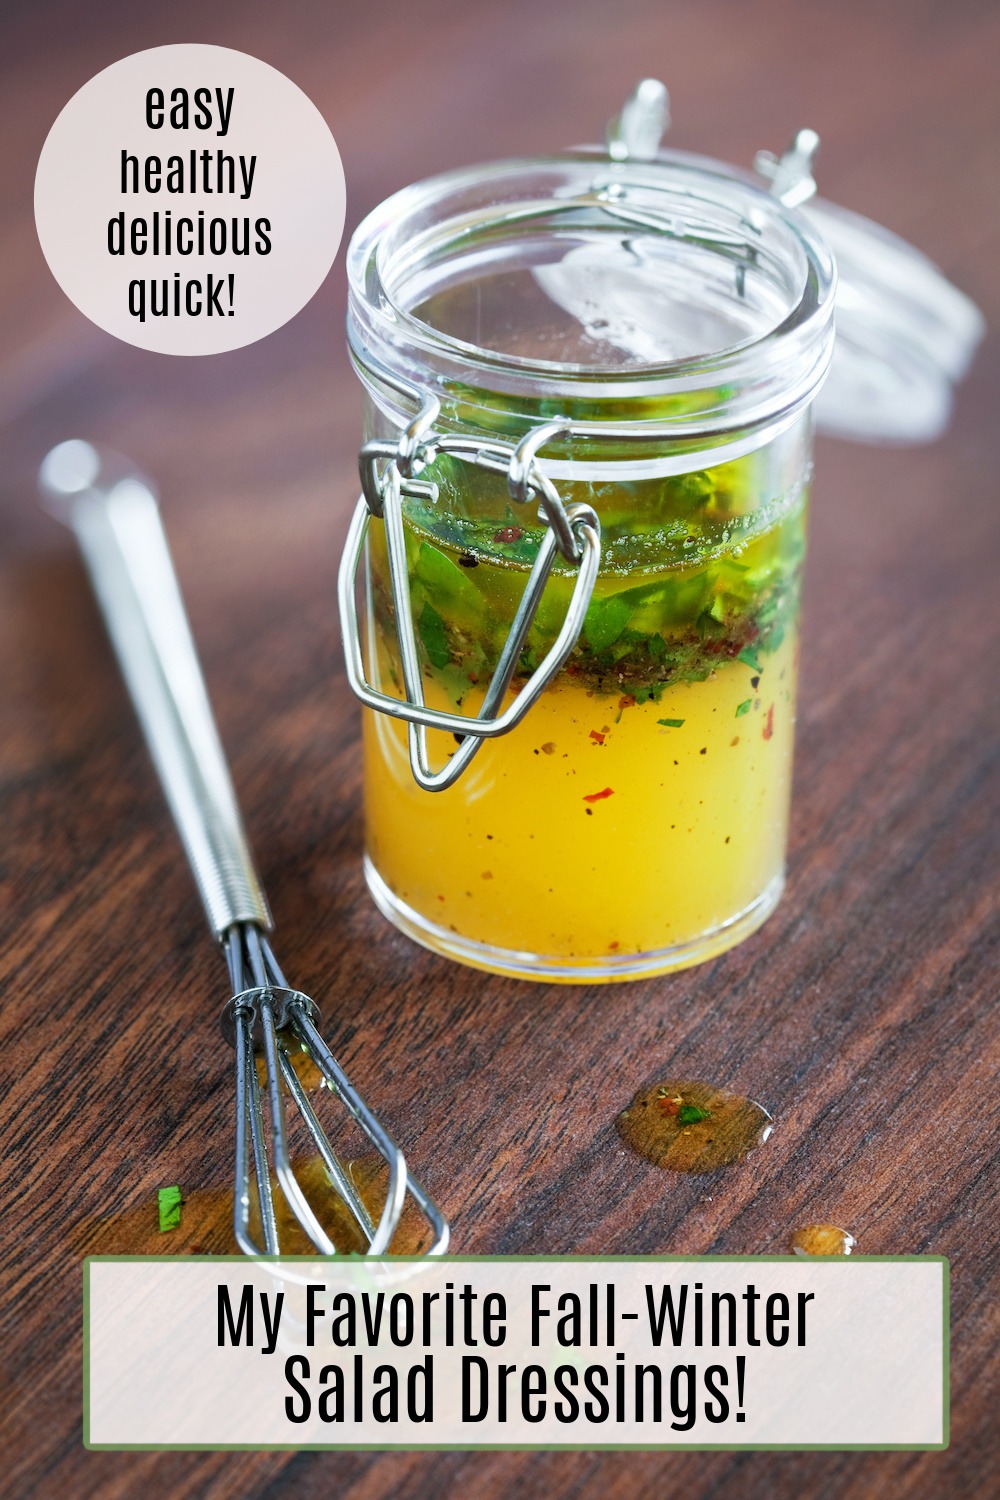 My Favorite Fall/Winter Salad Dressings! A jar of lemon vinaigrette with chives in a glass jar with a small whisk on the counter